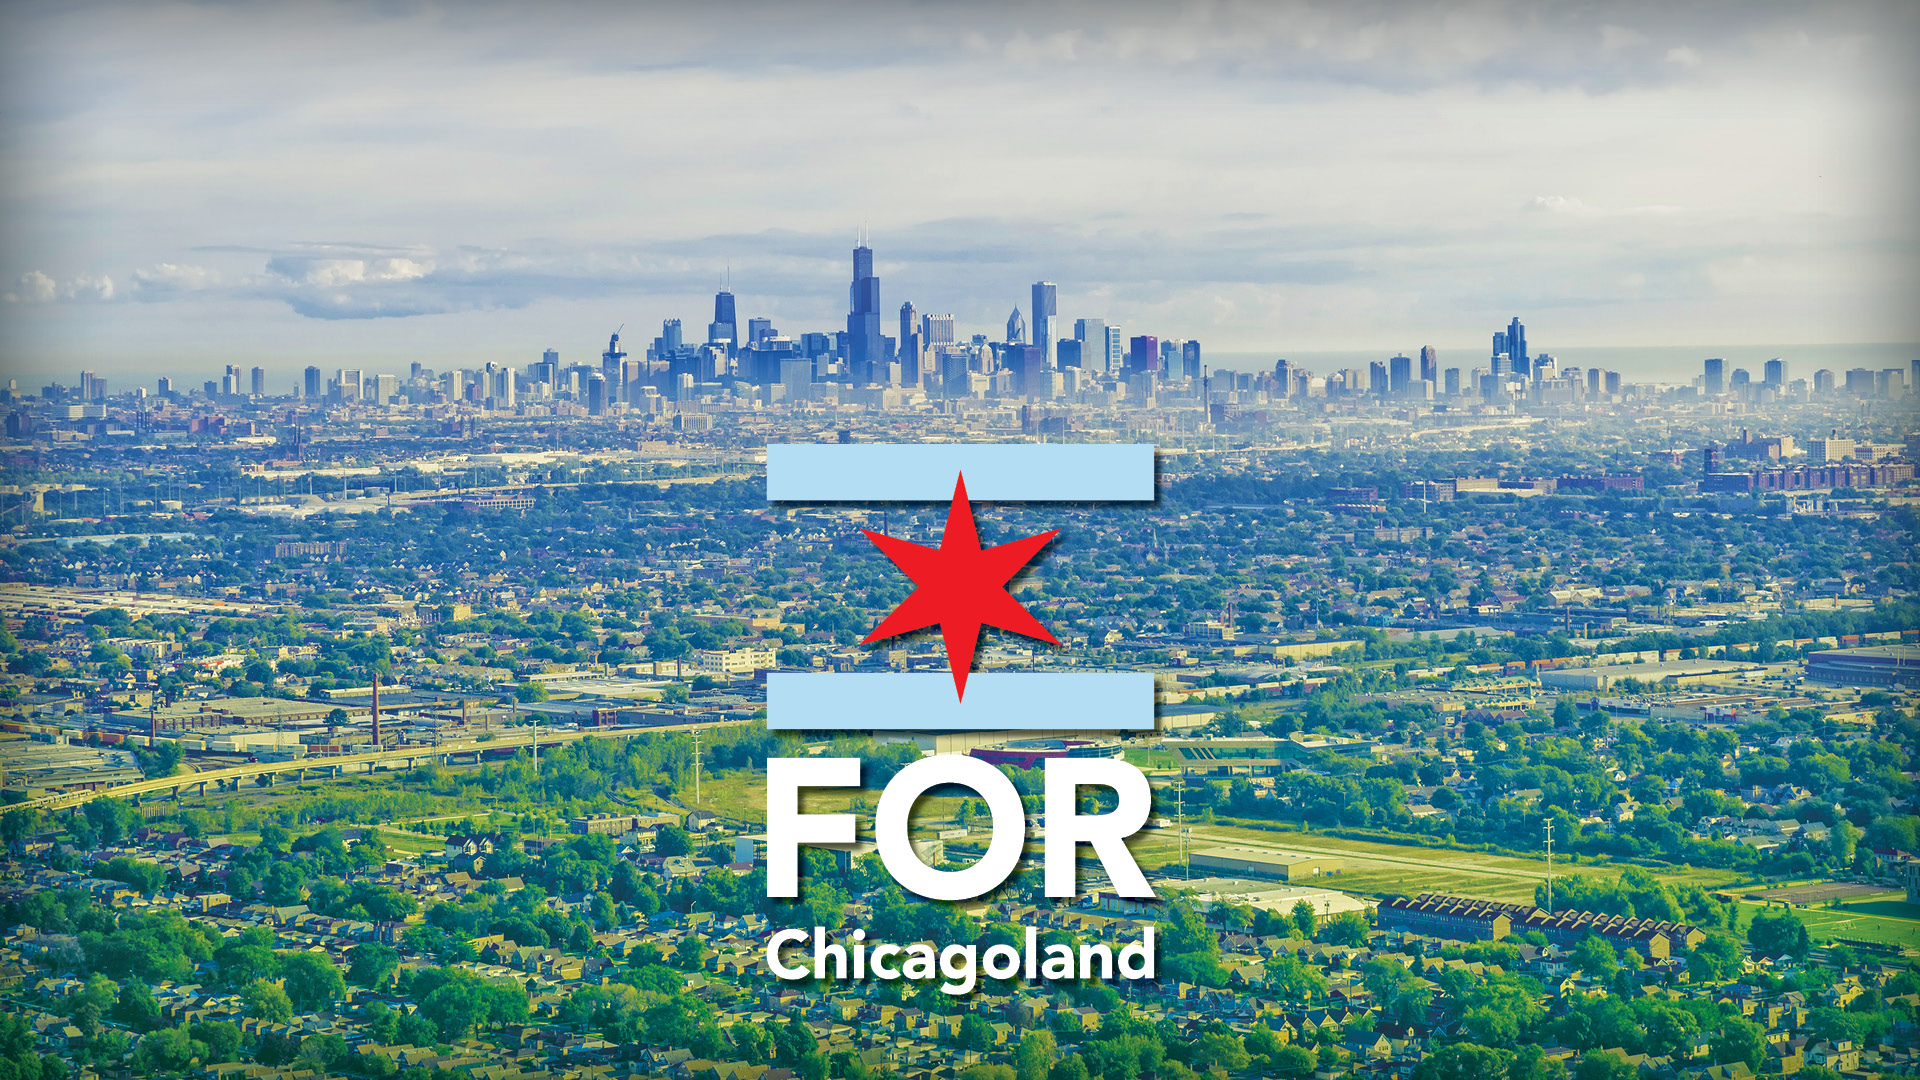 For Chicagoland | First Saturday Serve
Saturday, April 1
 
